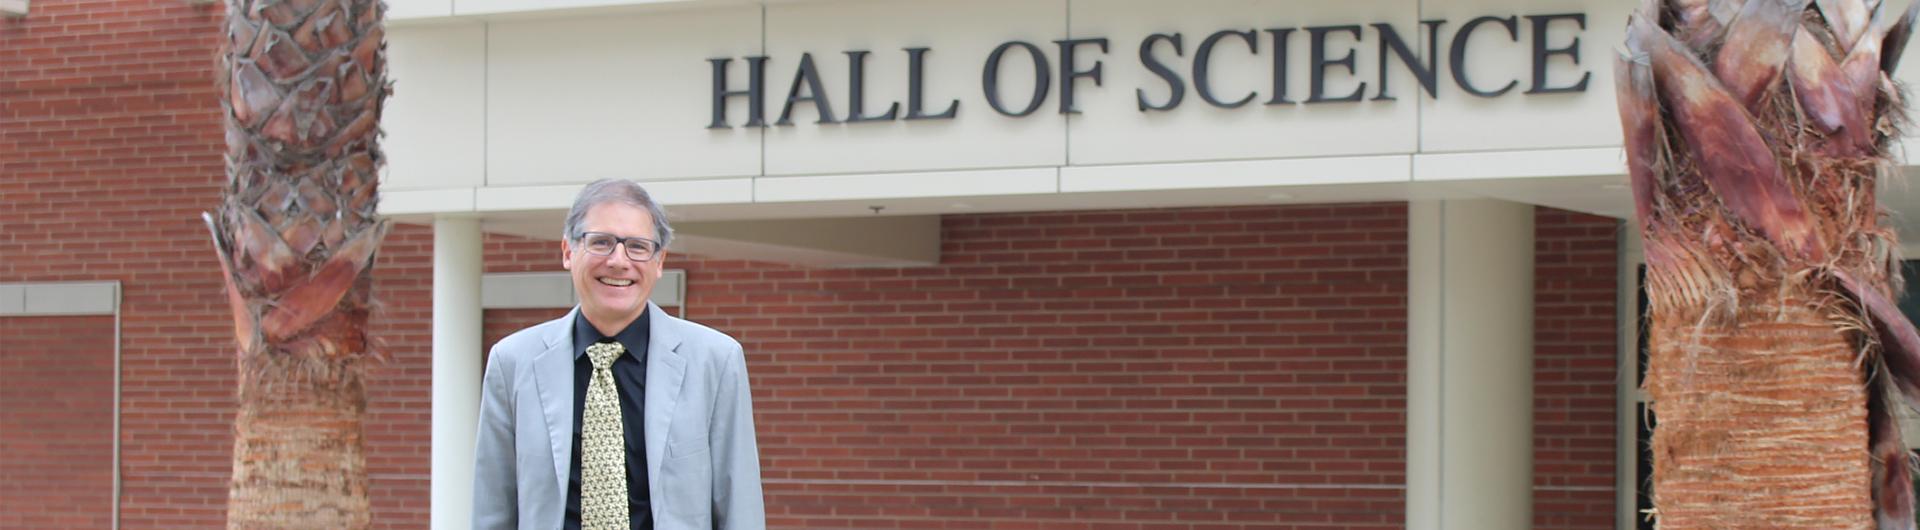 Dean Curtis Bennett and the Hall of Science building